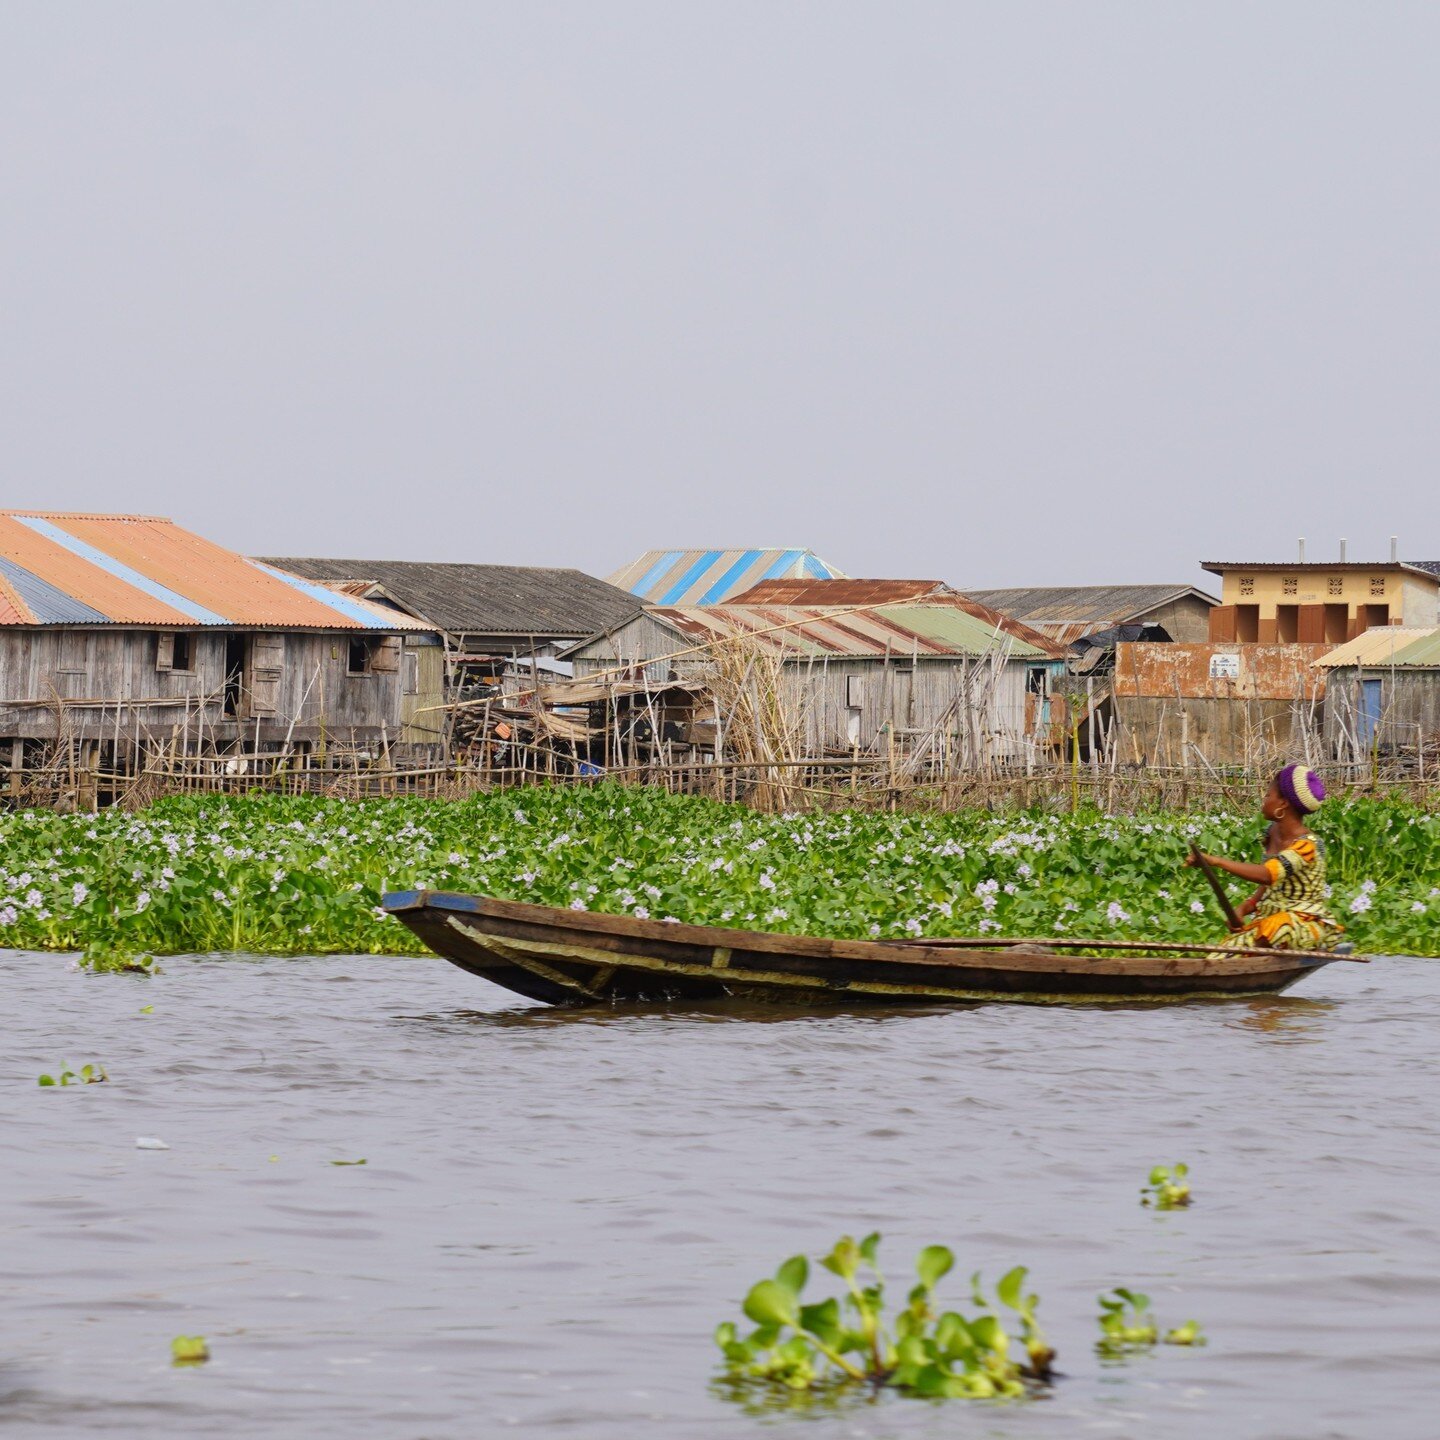 Lake Nokou&eacute;, North of Cotonou. From their houses on stilts, the women from the Cooperative of Women Fishmongers and Shrimp Processors (COMATRANC, Coop&eacute;rative de mareyeuses et transformatrices de crevettes) based in So-&Acirc;va speciali